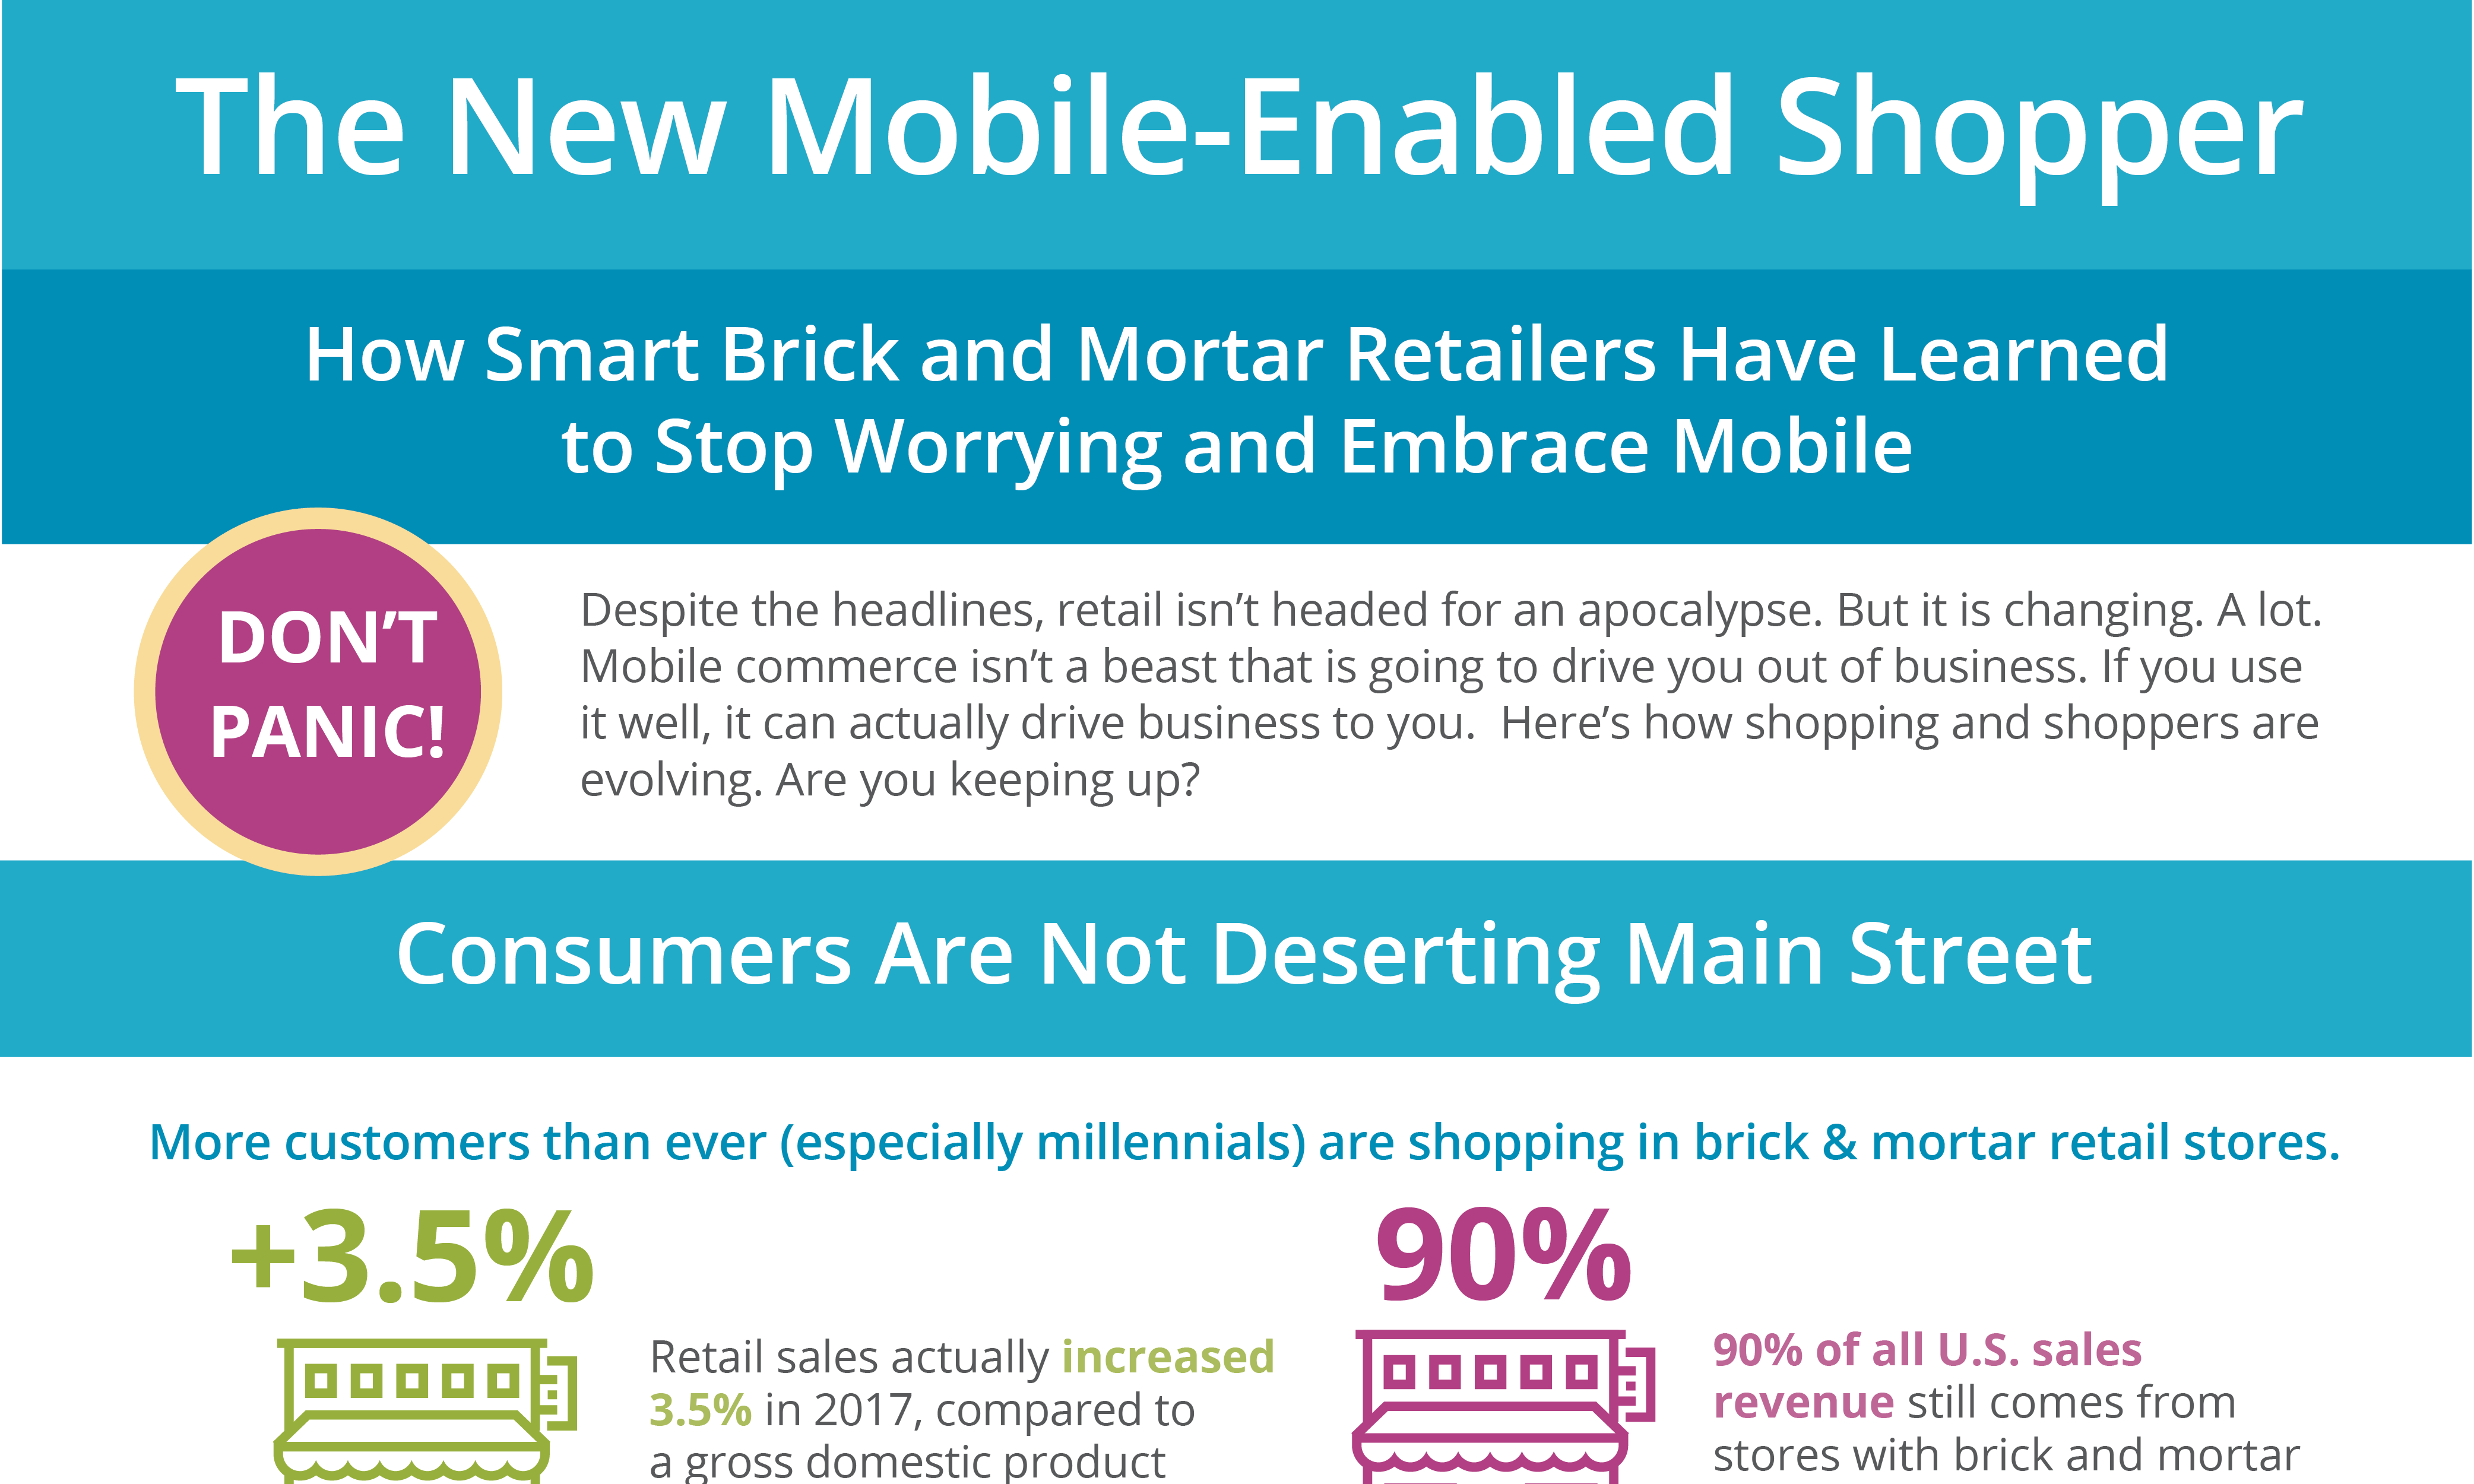 The new mobile enabled shopper